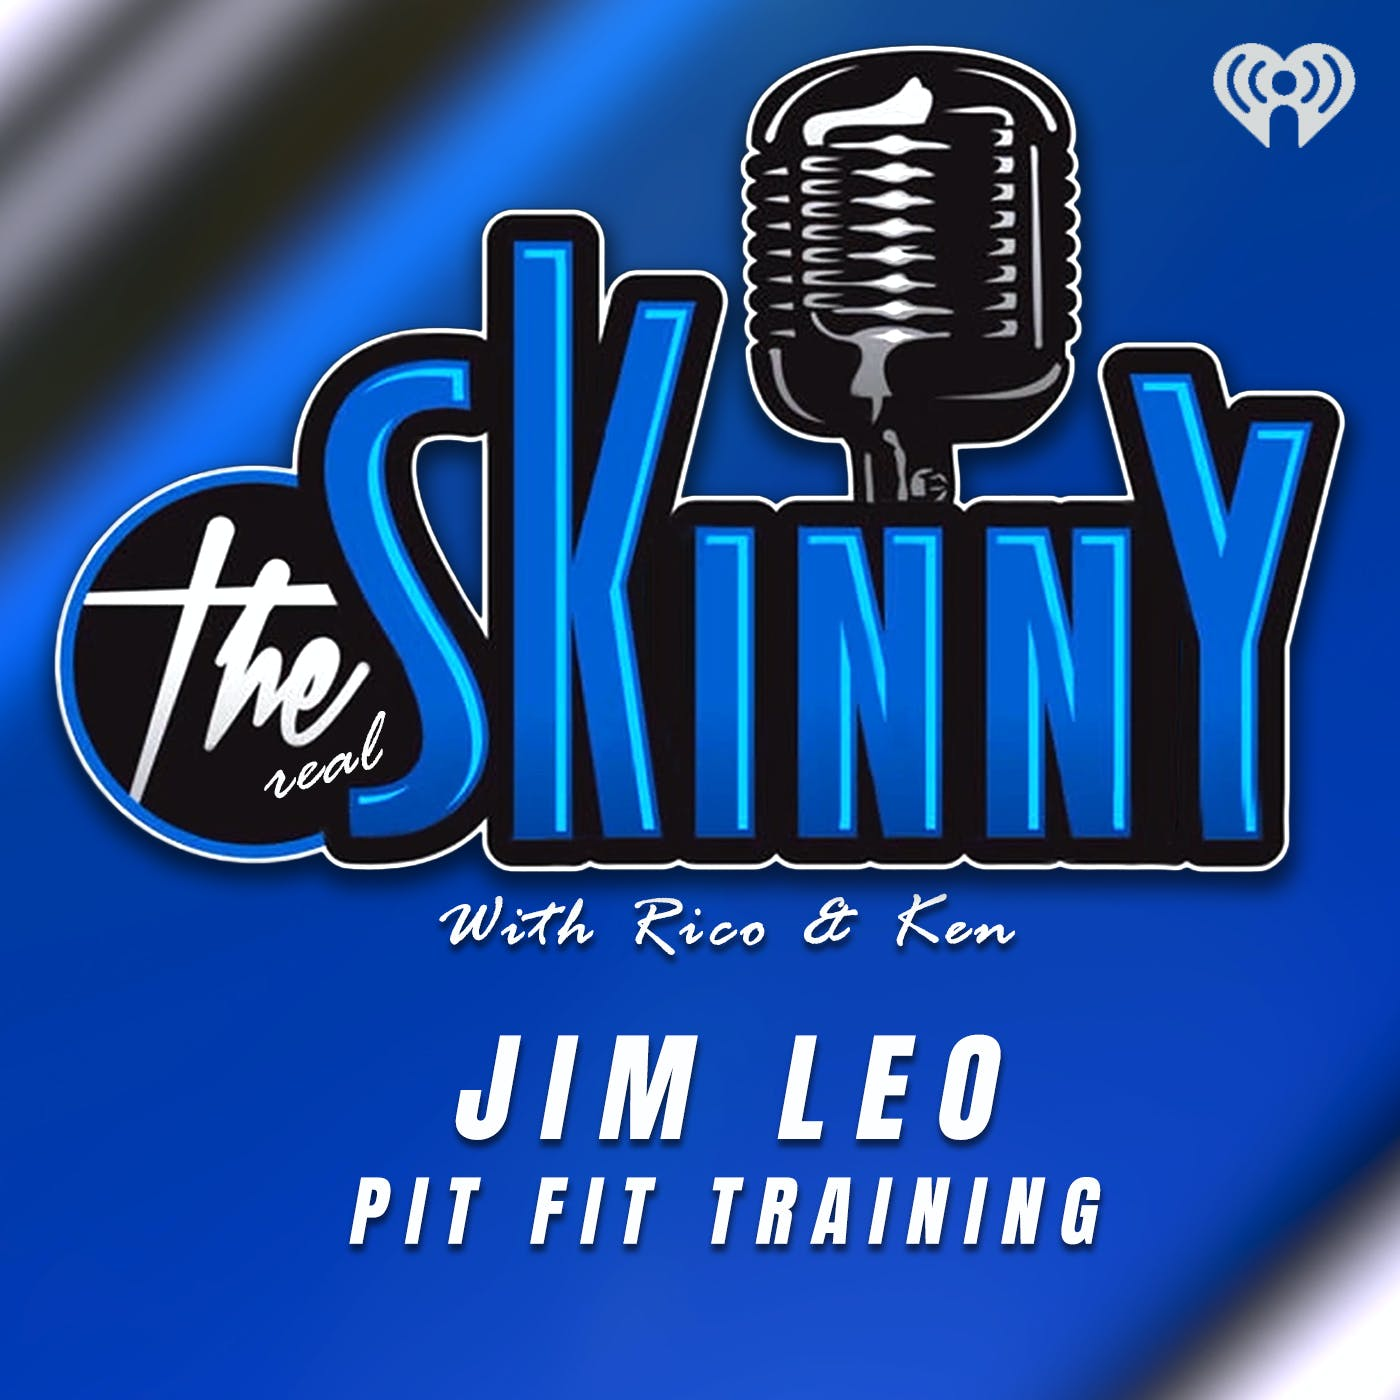 The Skinny with Rico and Ken welcomes Jim Leo of PitFit Training to the studio.